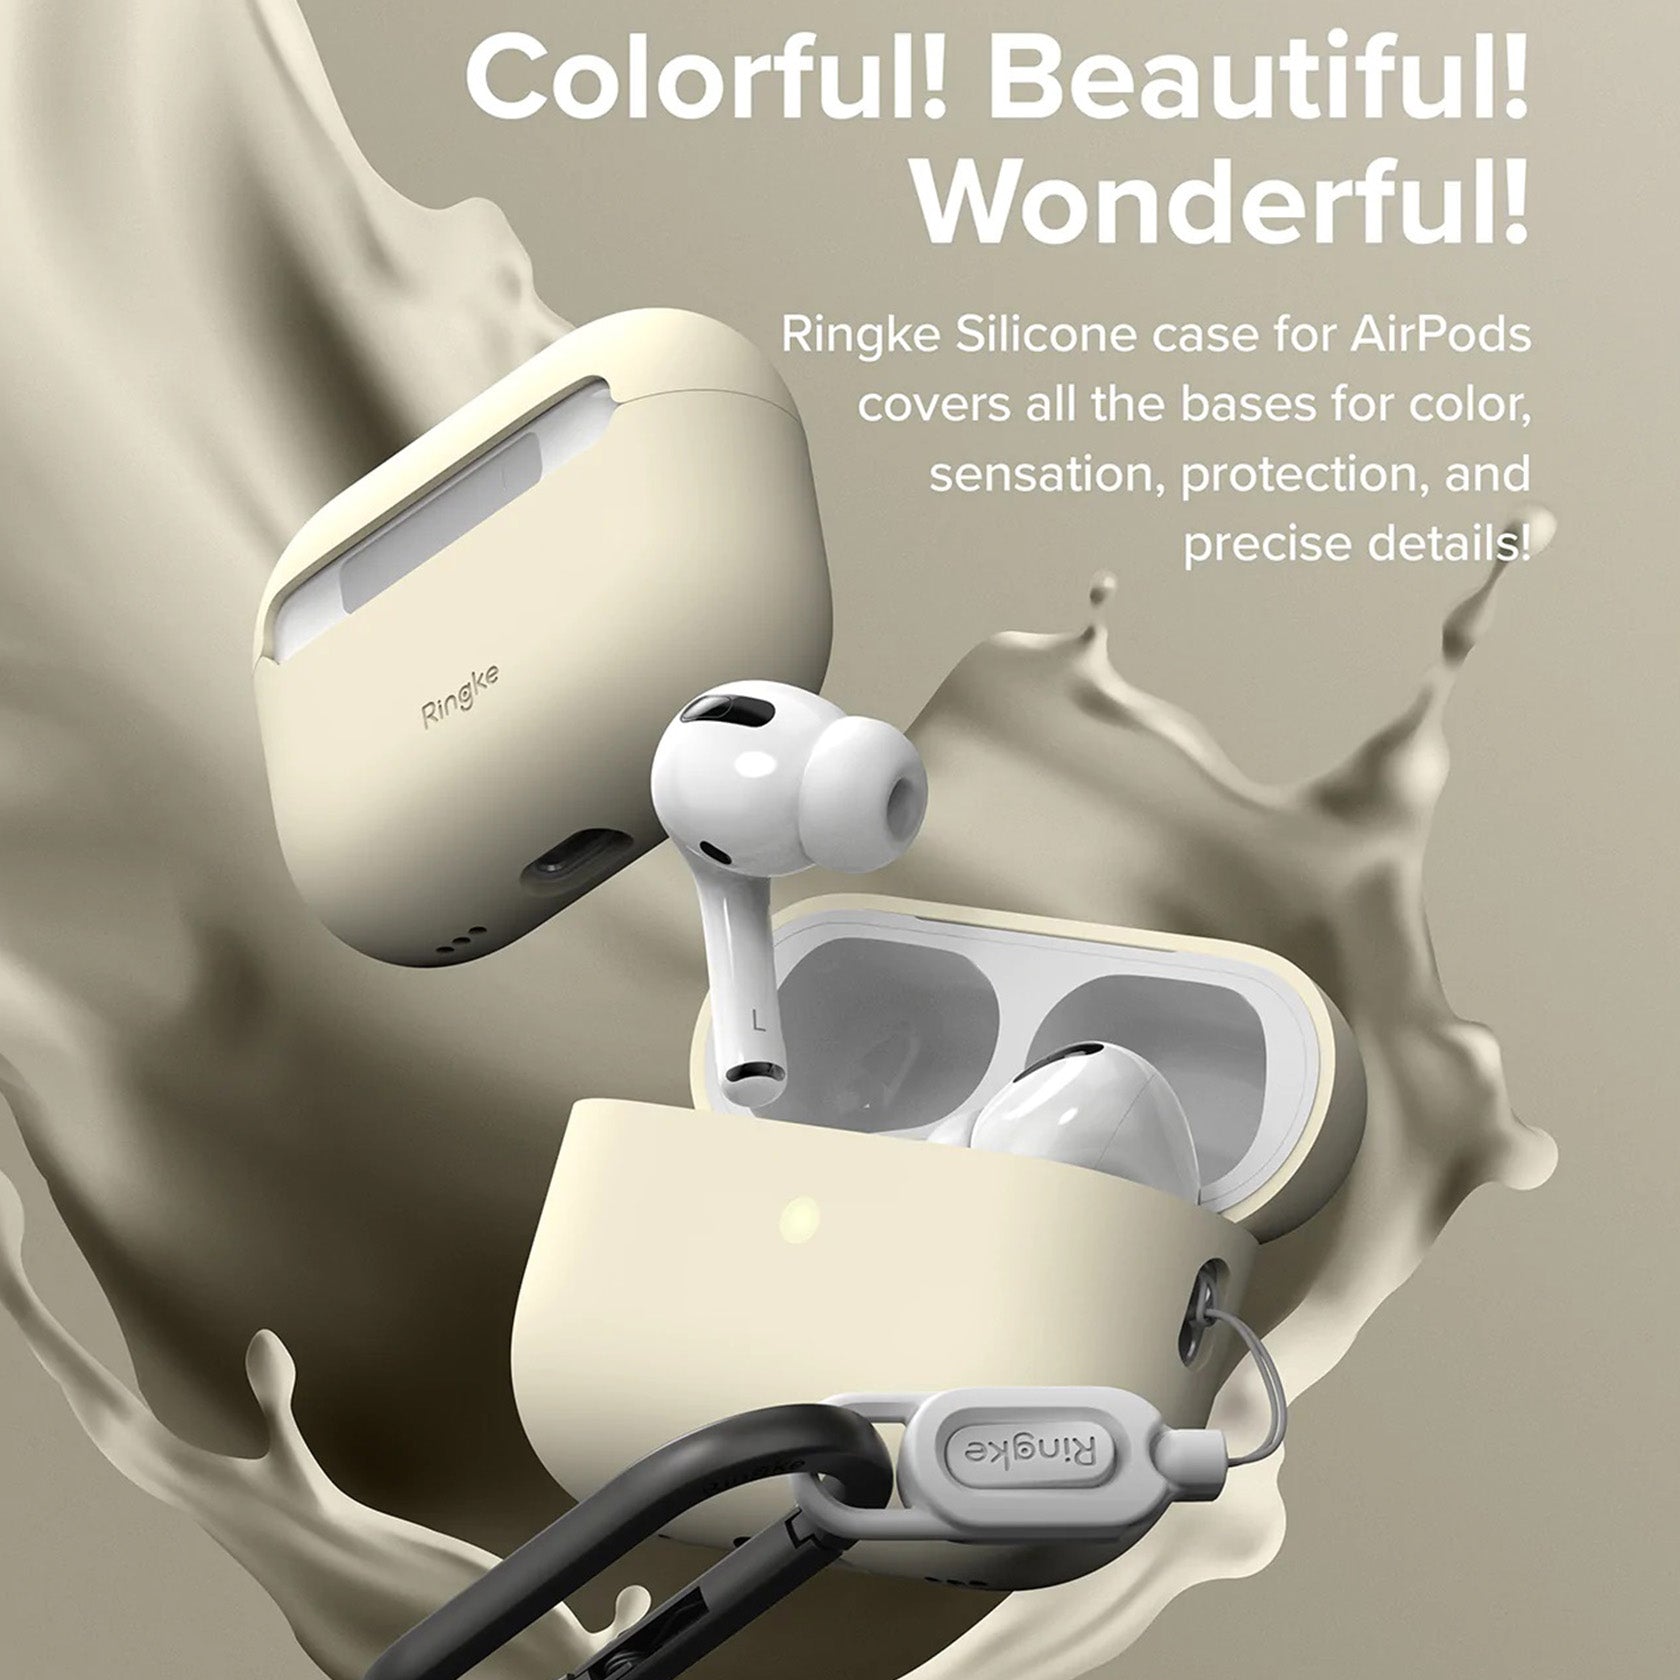 Ringke Silicone AirPods Pro 2 Case